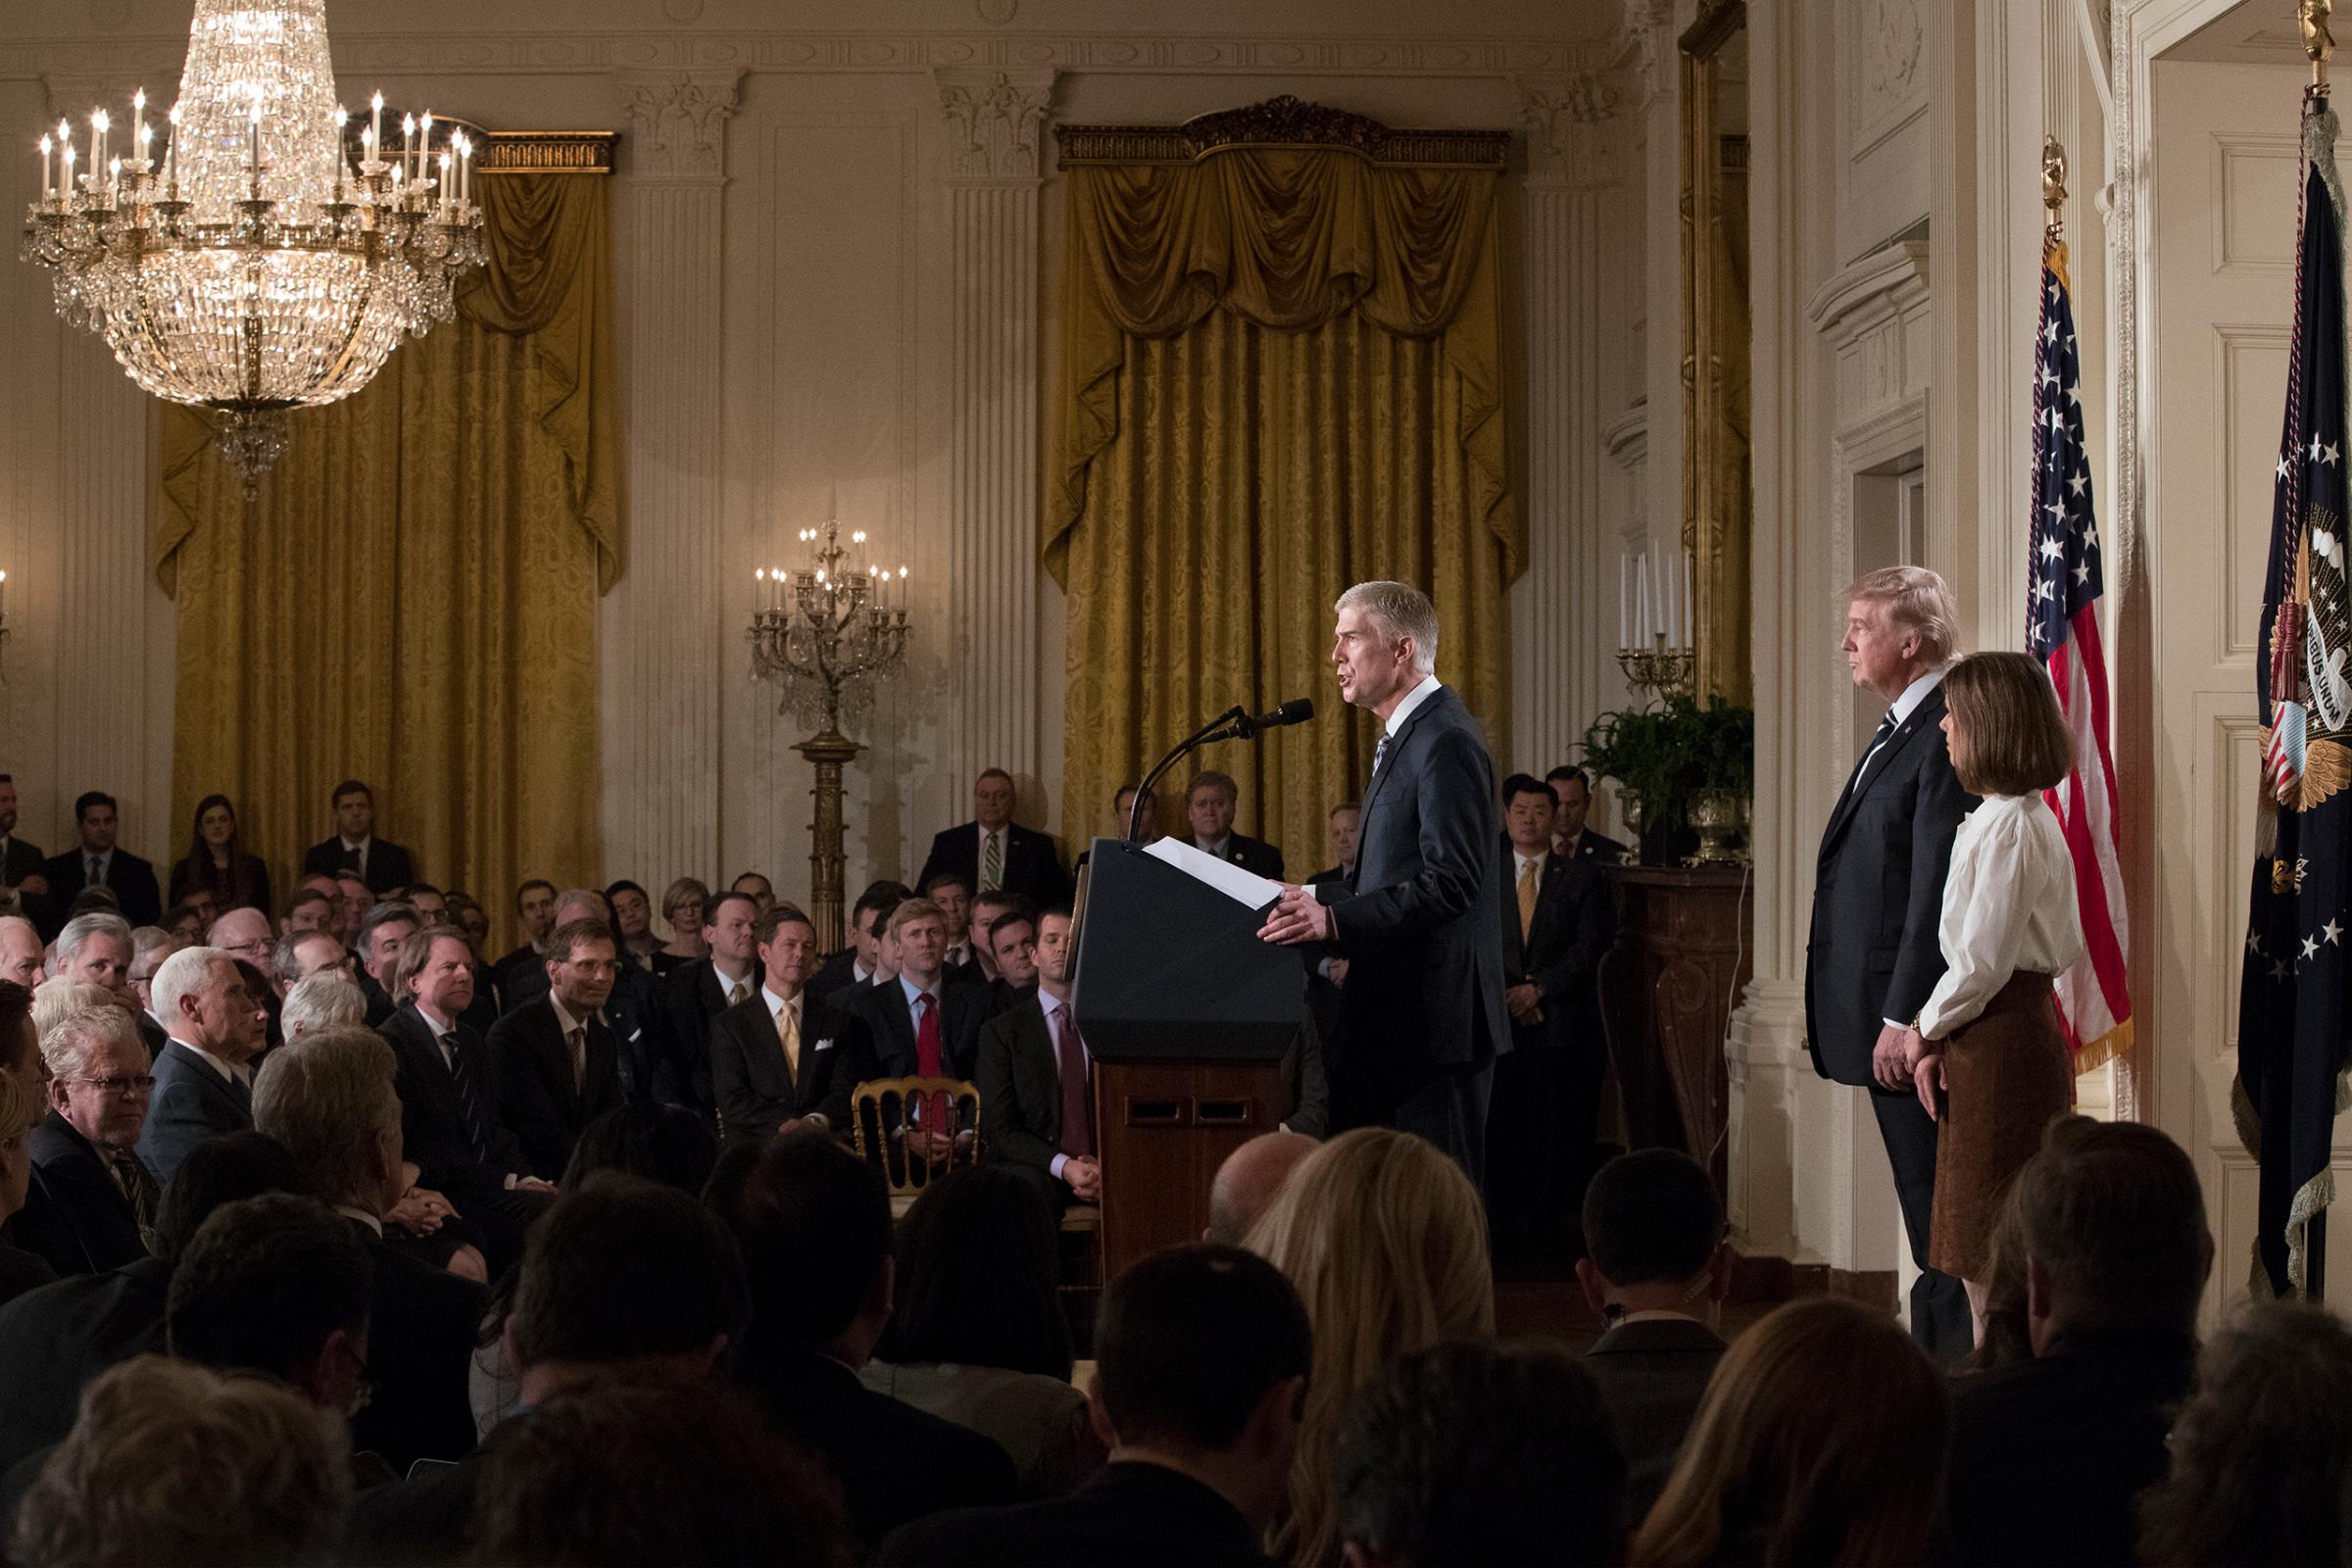 Neil Gorsuch delivers remarks after US President Donald Trump announced him as his nominee for the Supreme Court in the East Room of the White House, on Jan. 31, 2017.